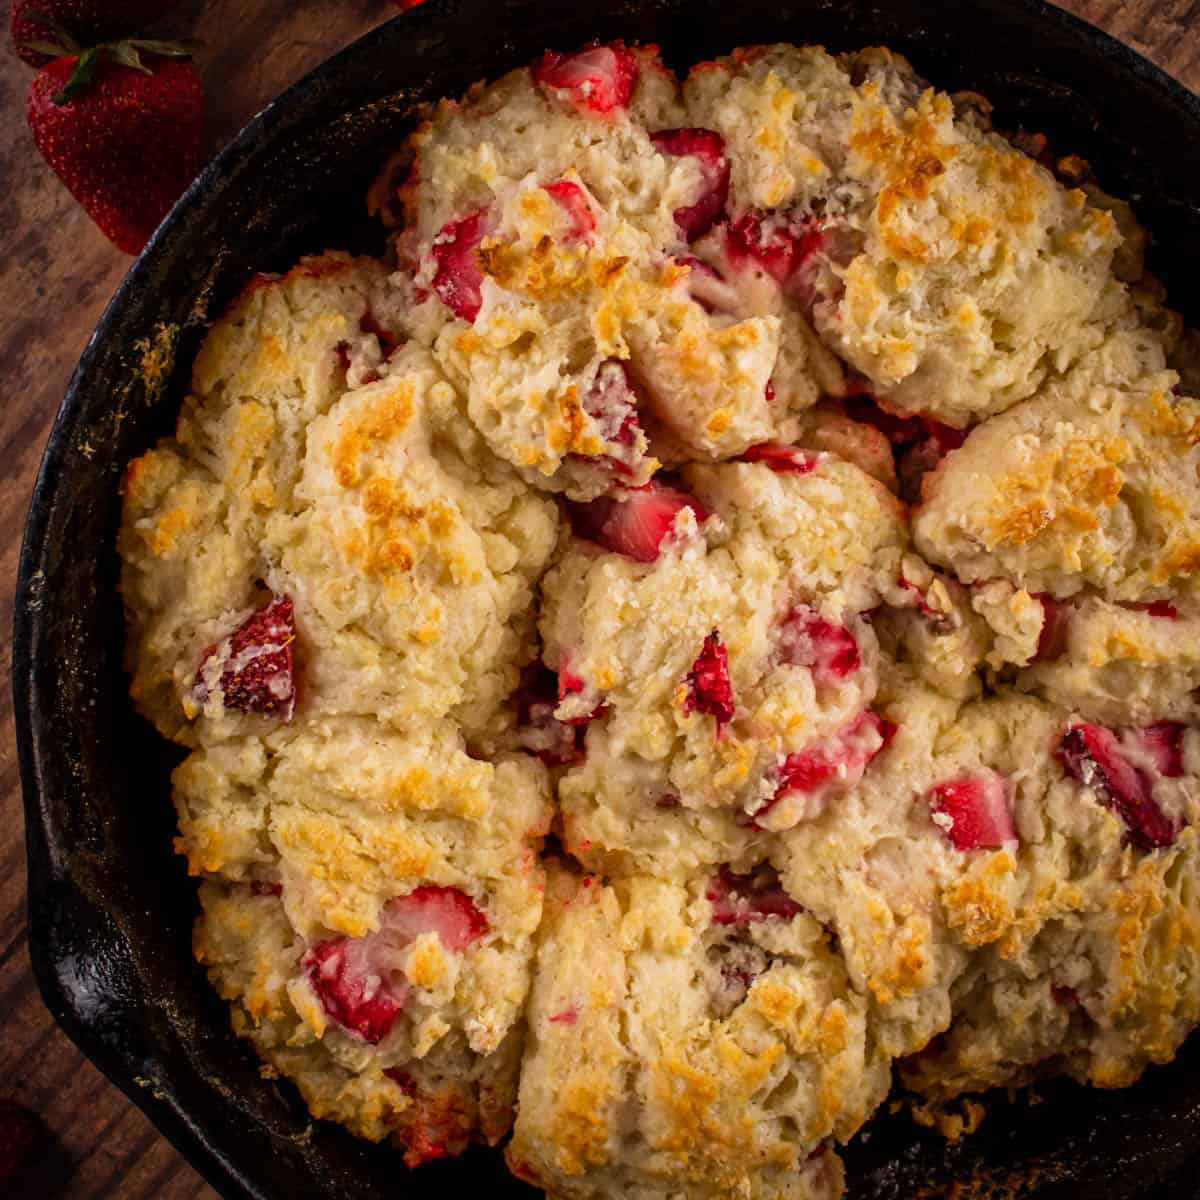 cast iron skillet with drop biscuits made with buttermilk and fresh strawberries